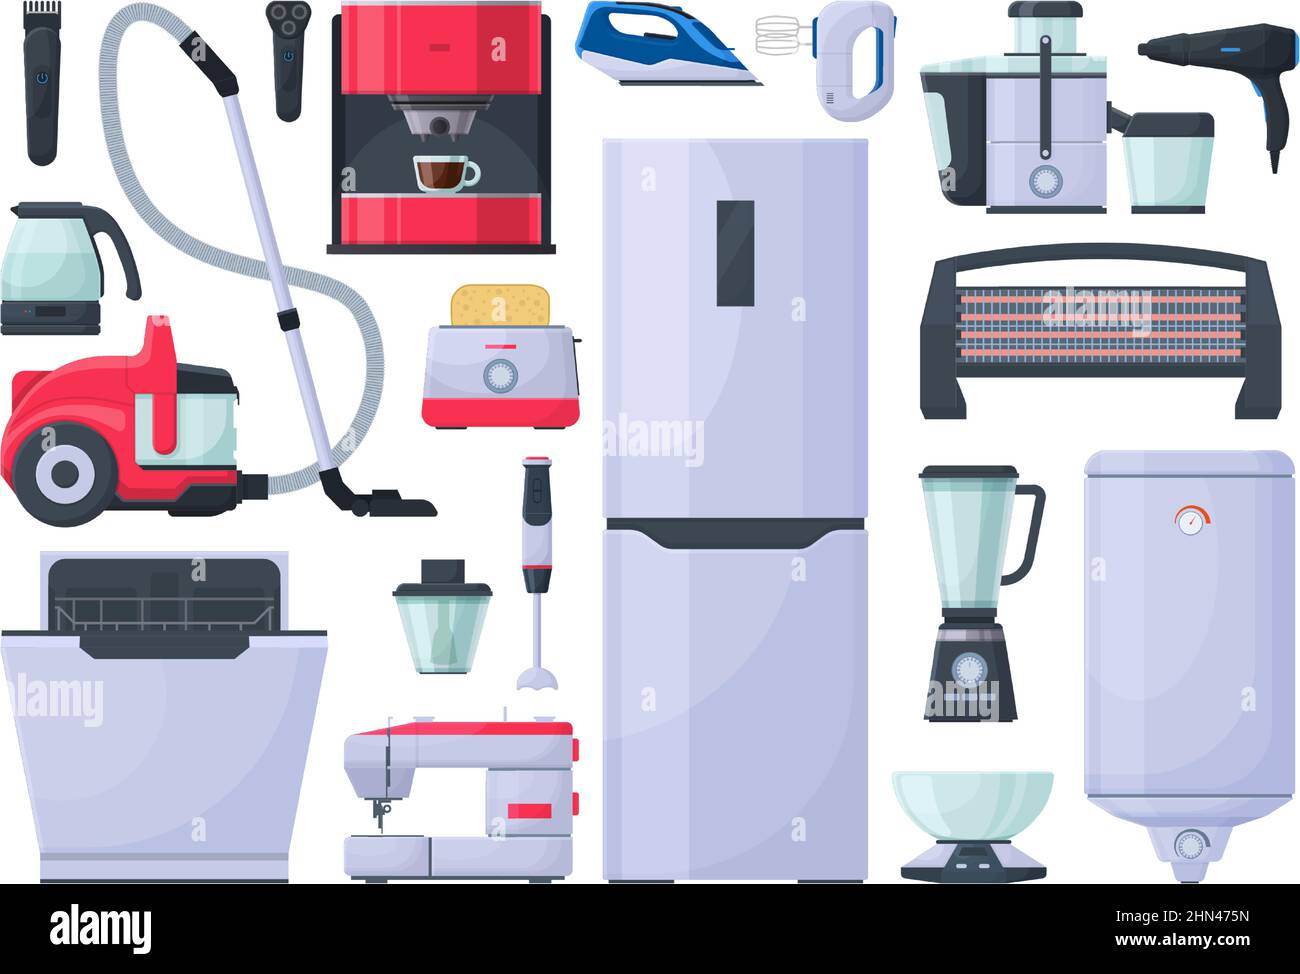 Home appliances, vacuum cleaner, iron and coffee machine. Refrigerator, blender and toaster electronic gadgets vector illustration set. Electrical Stock Vector